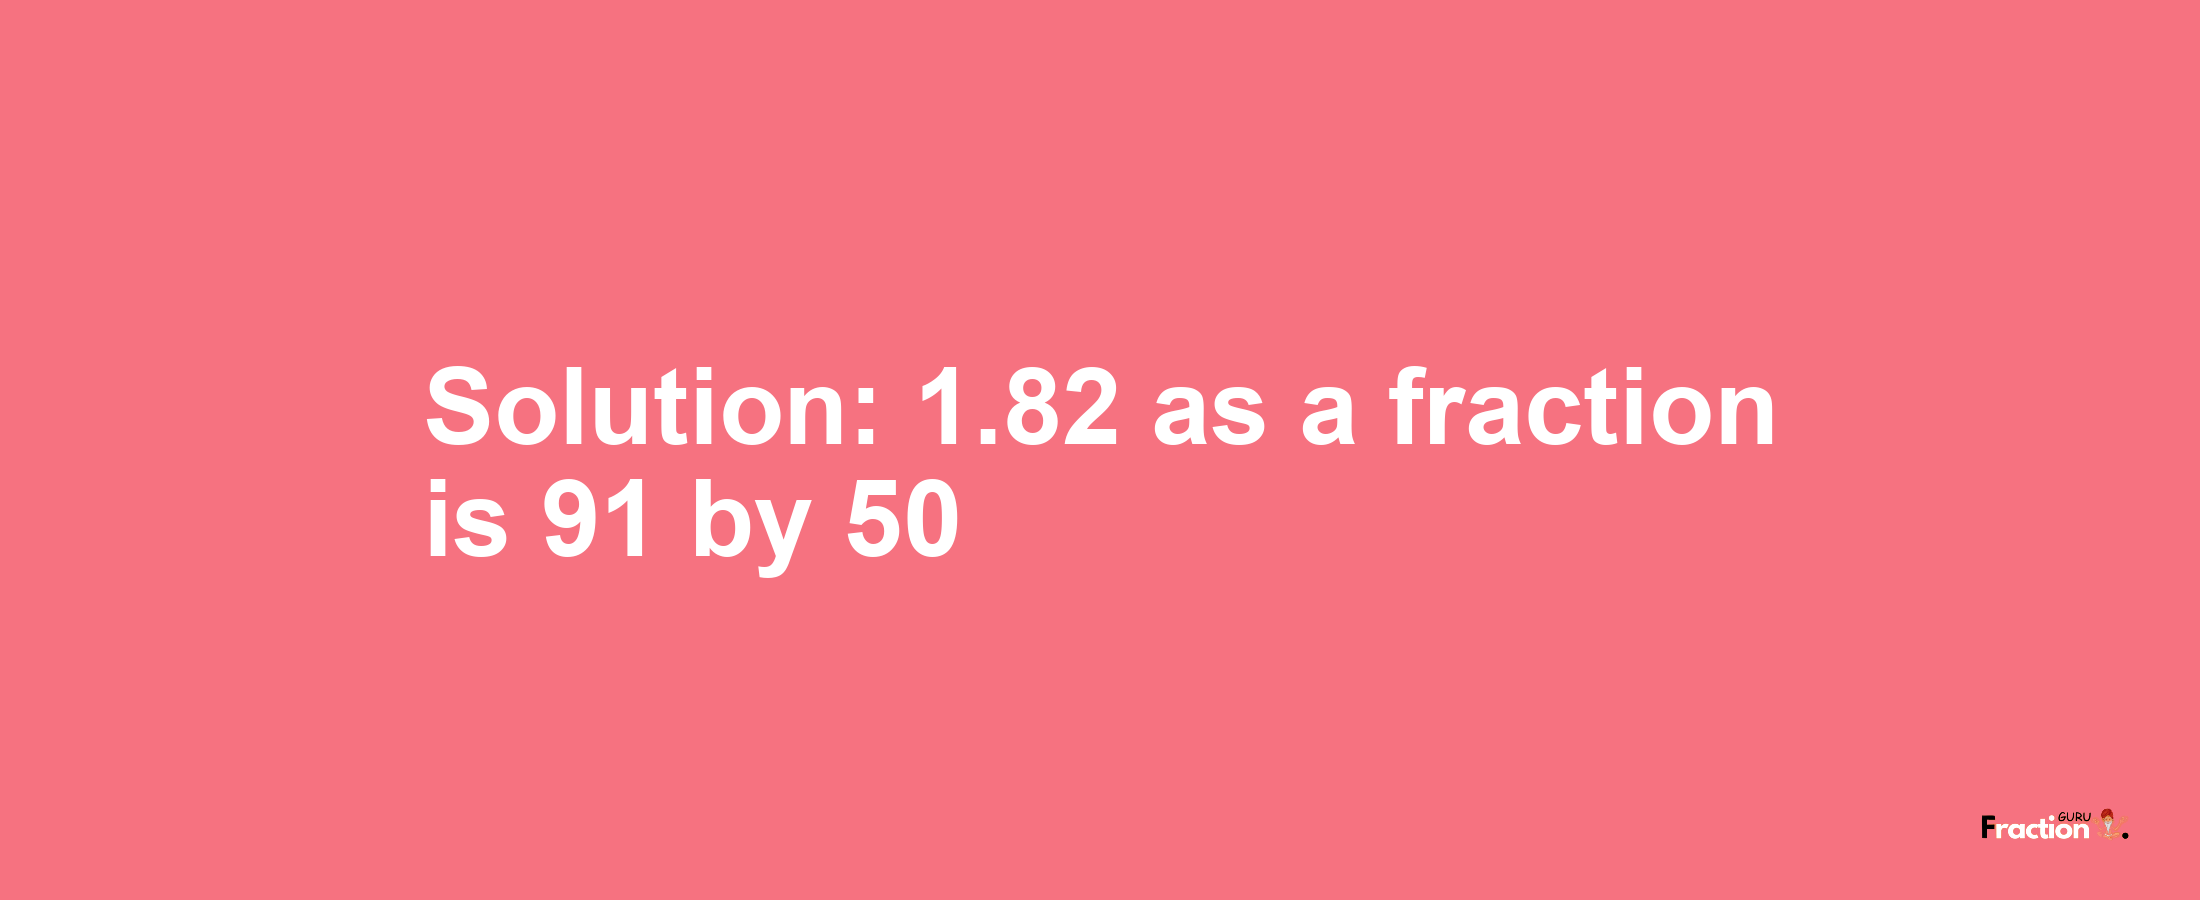 Solution:1.82 as a fraction is 91/50